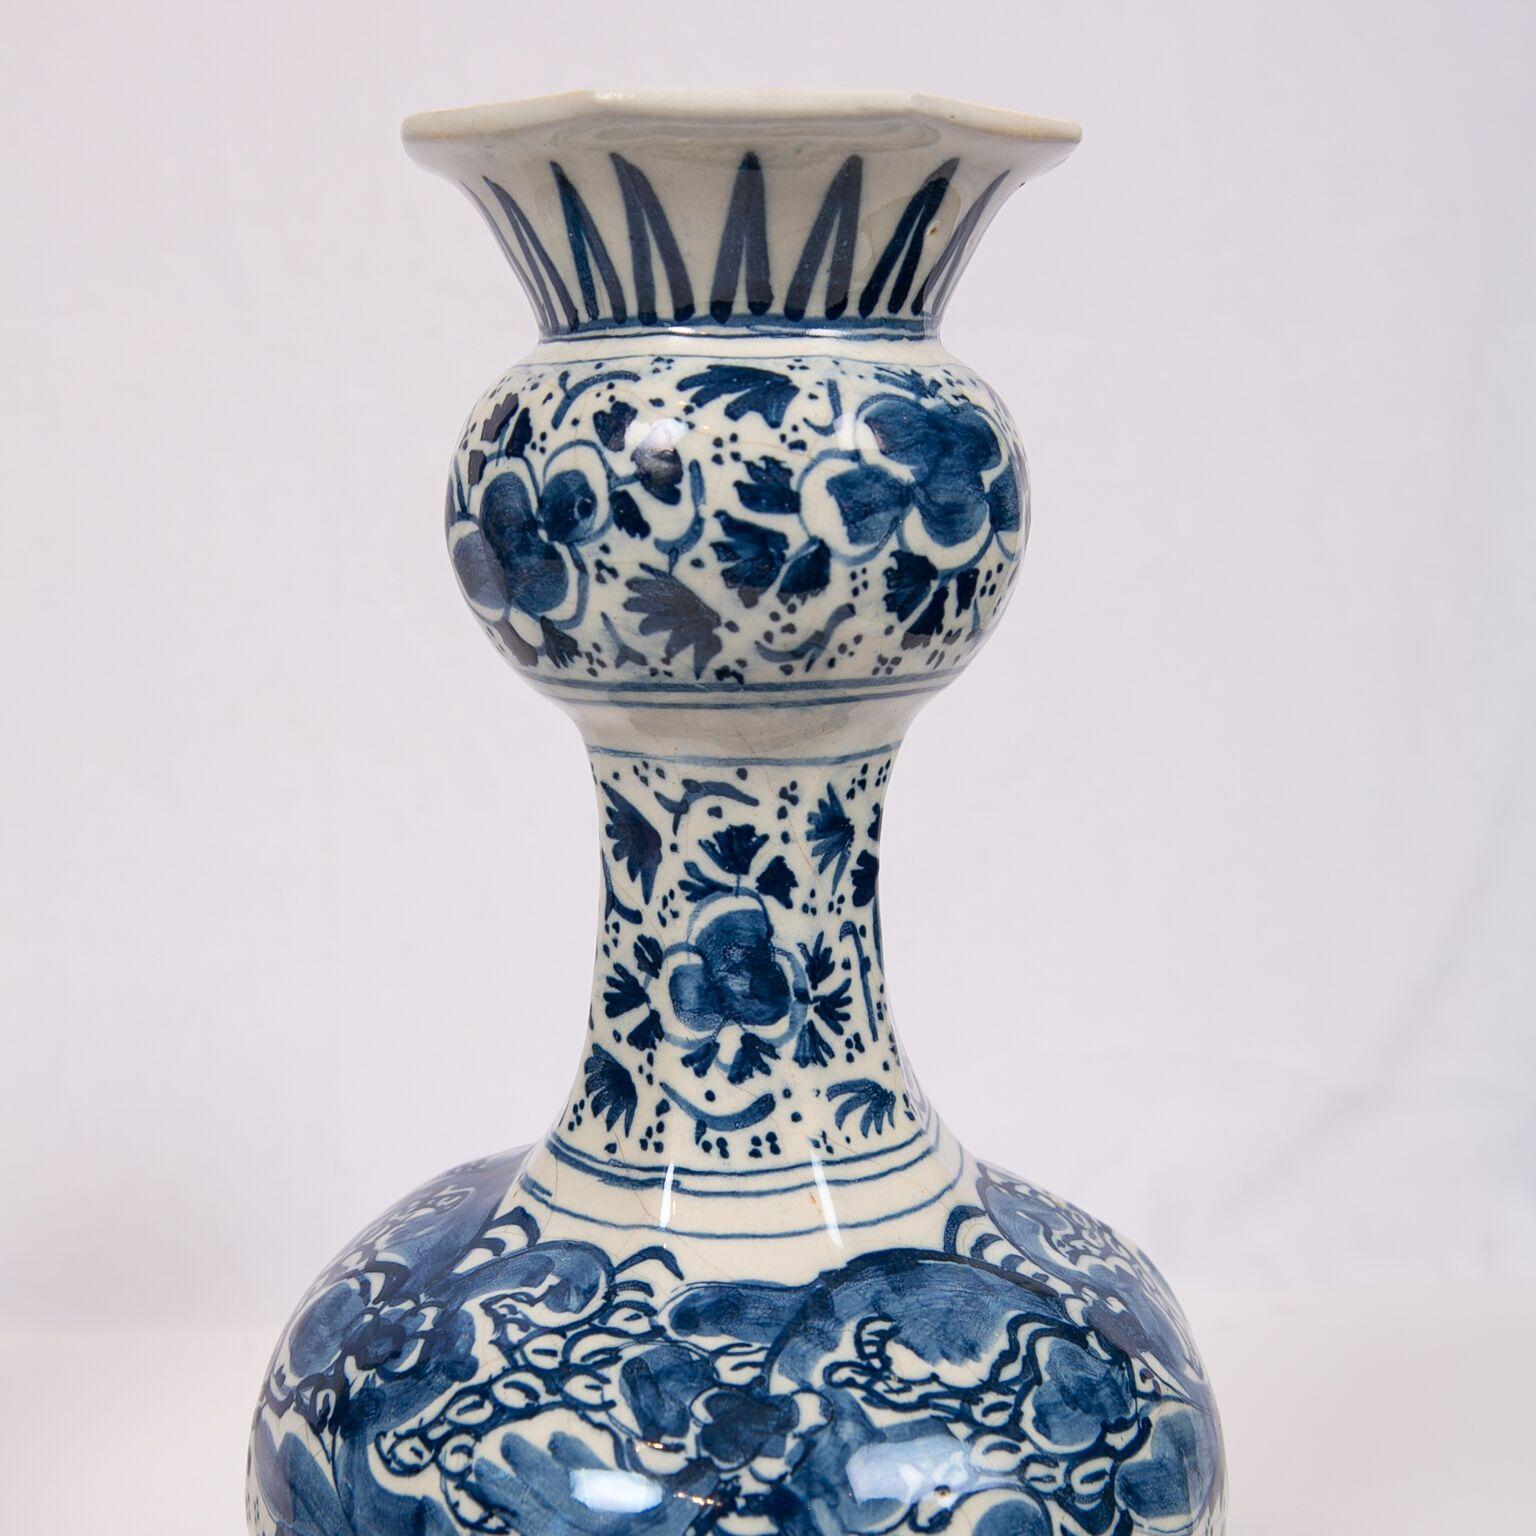 Pair of Blue and White Delft Vases Showing Peacocks and Flowers, 18th Century 4